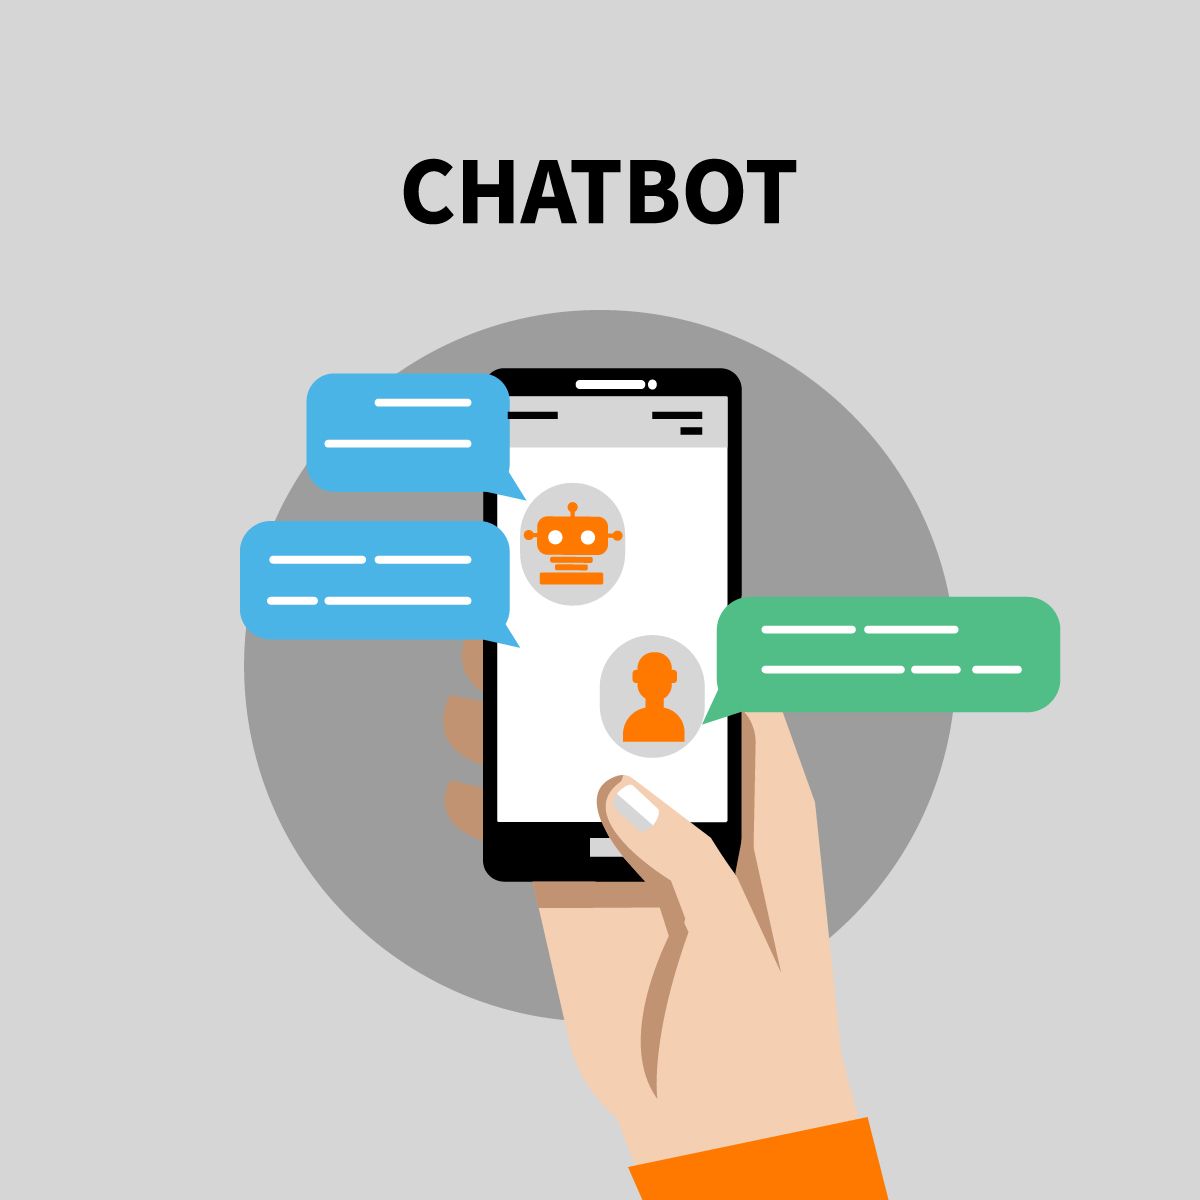 25% of customer service operations will use chatbot technology by 2020